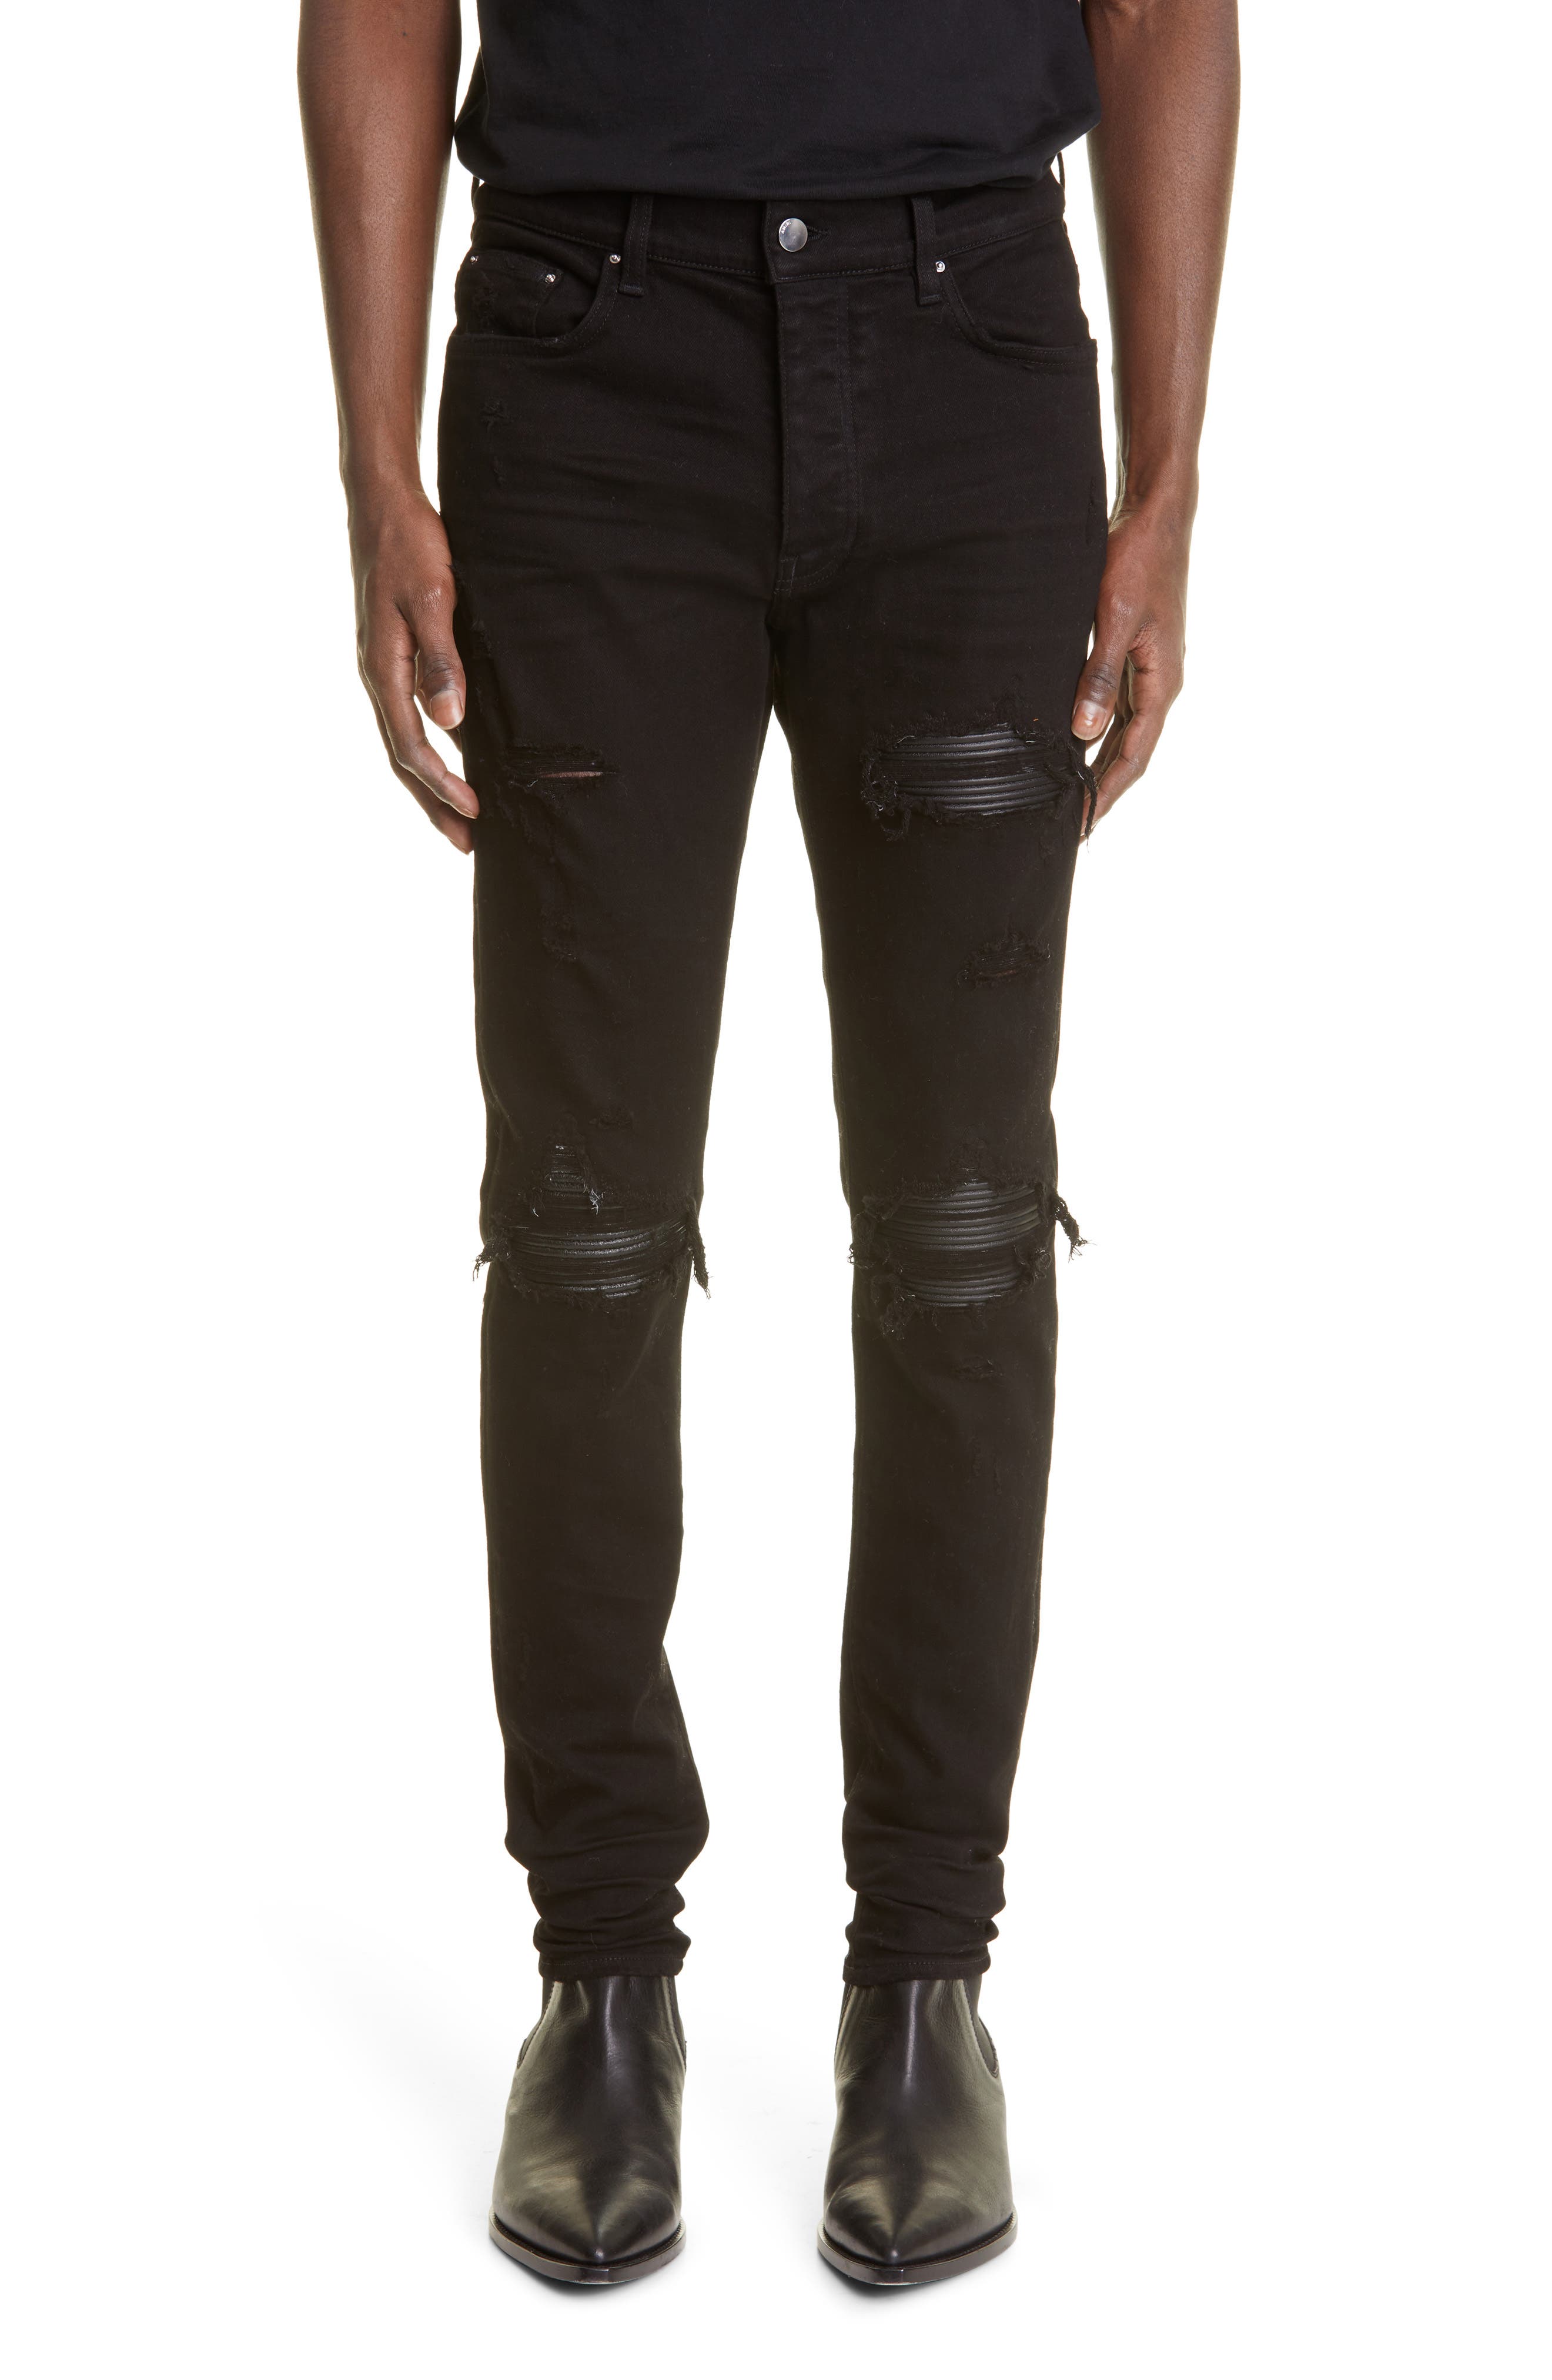 Amiri Denim Skinny Jeans With Leather Patches in Black for Men Mens Clothing Jeans Skinny jeans 